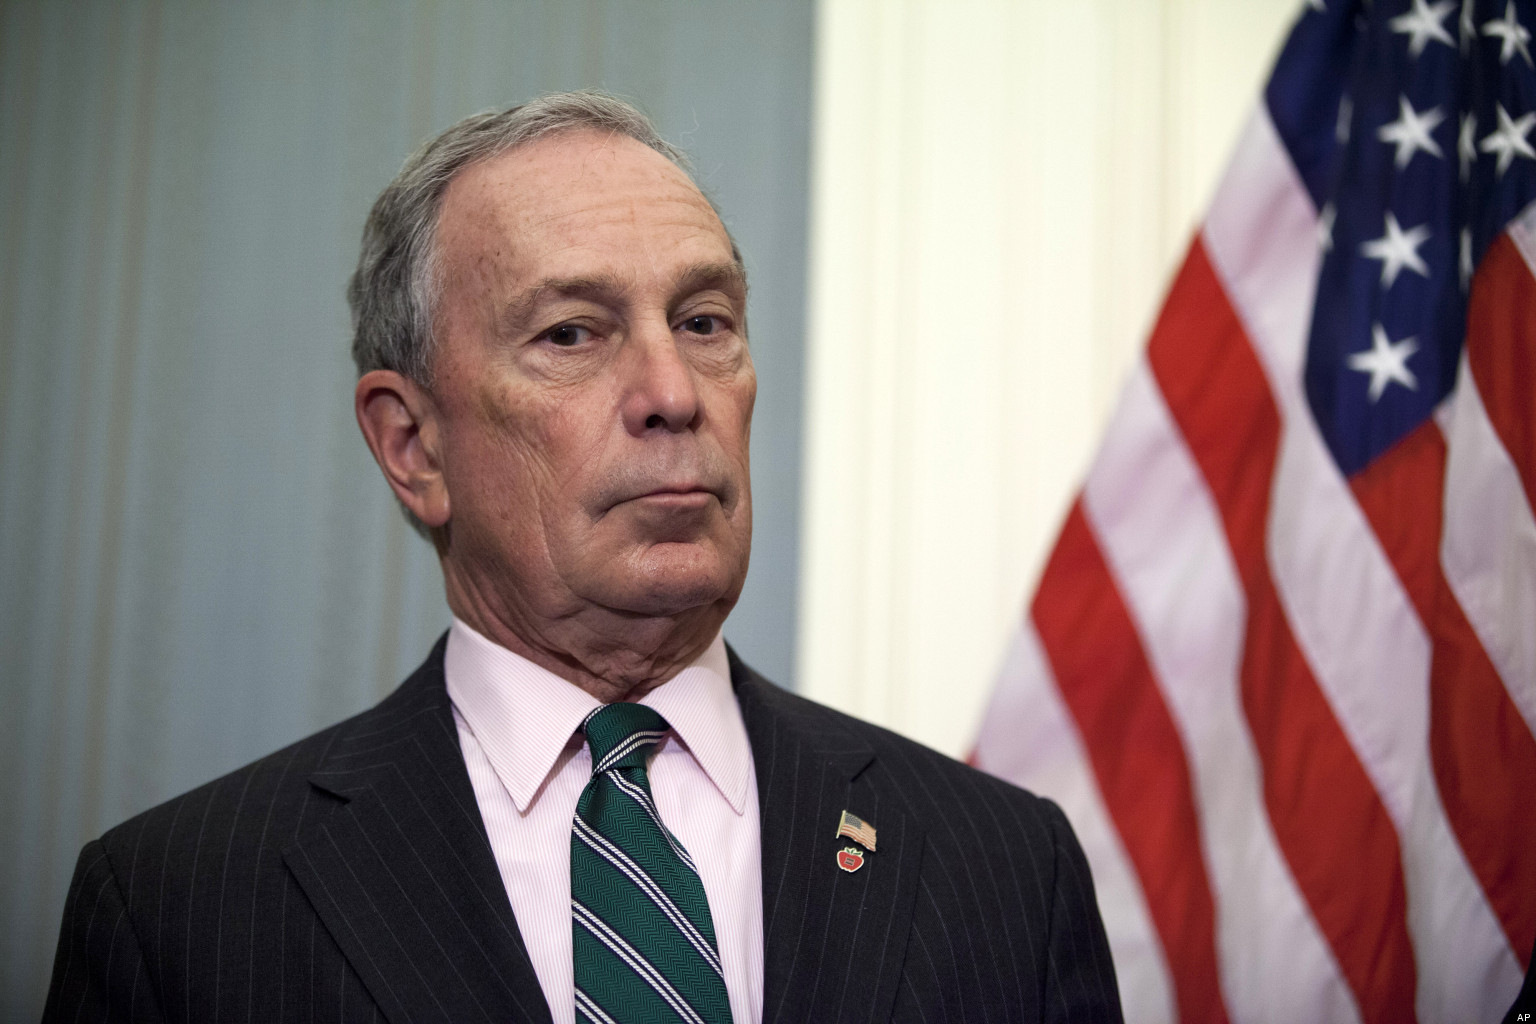 As Bloomberg weighs White House run, Iowa voters ask, 'Who?'